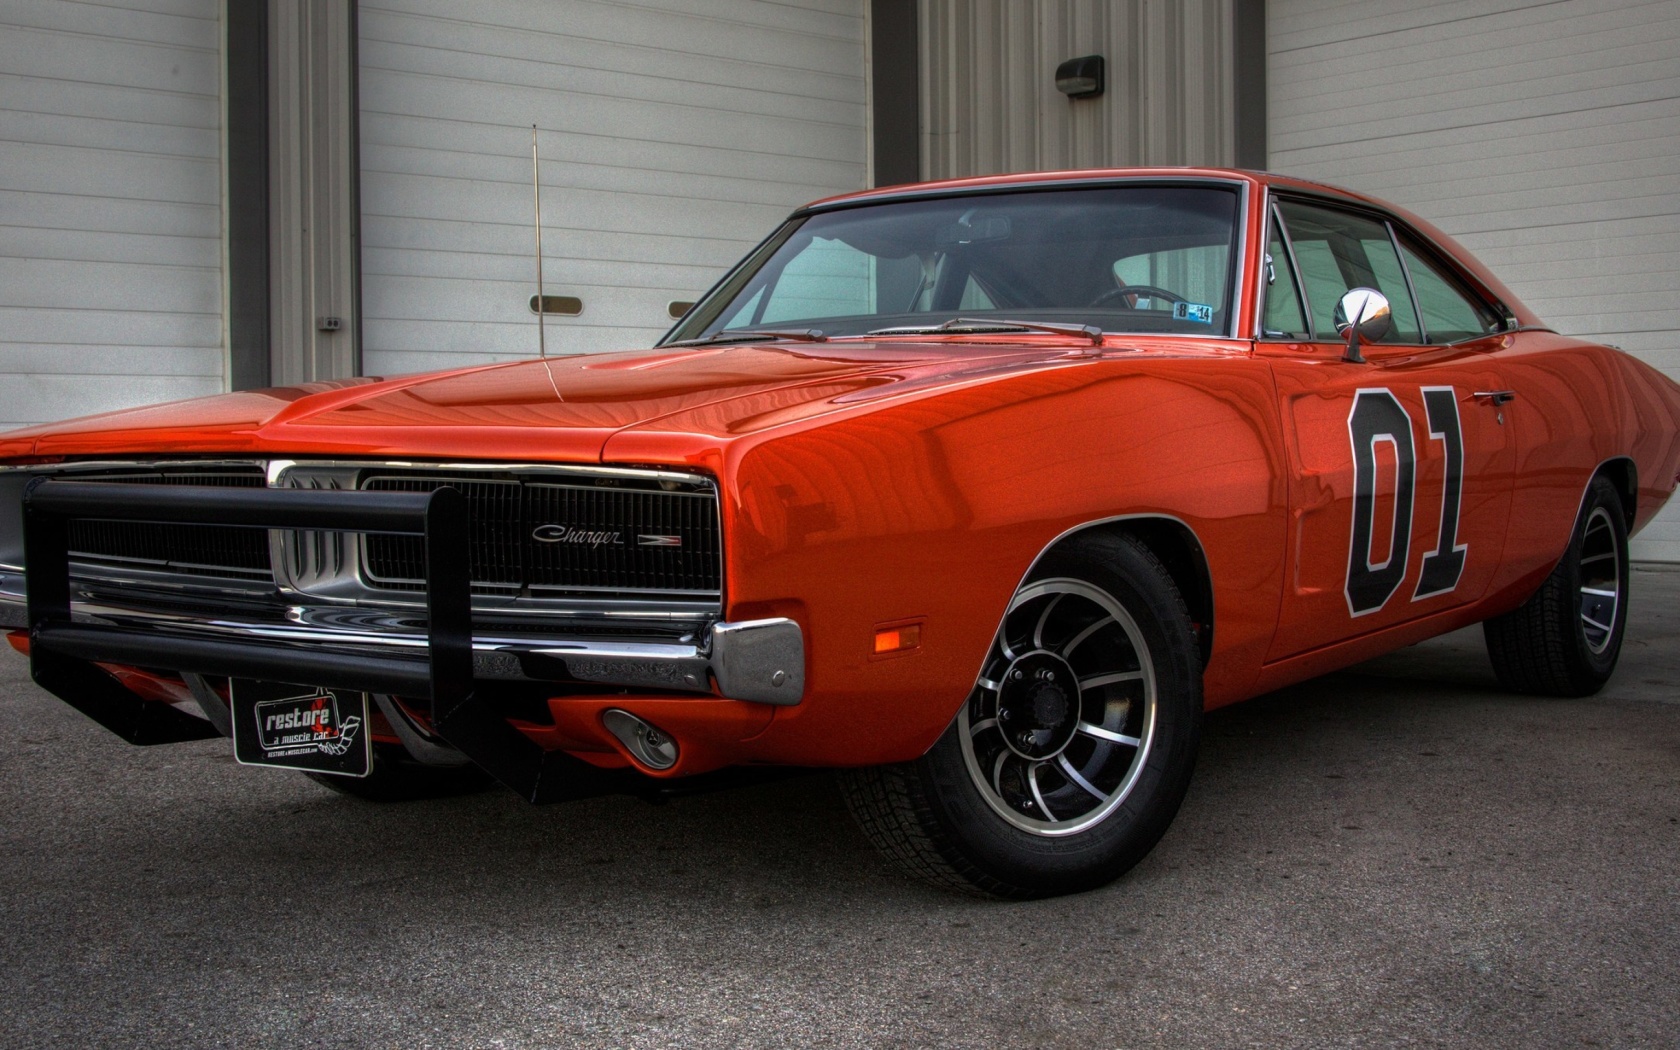 1969 Dodge Charger wallpaper 1680x1050